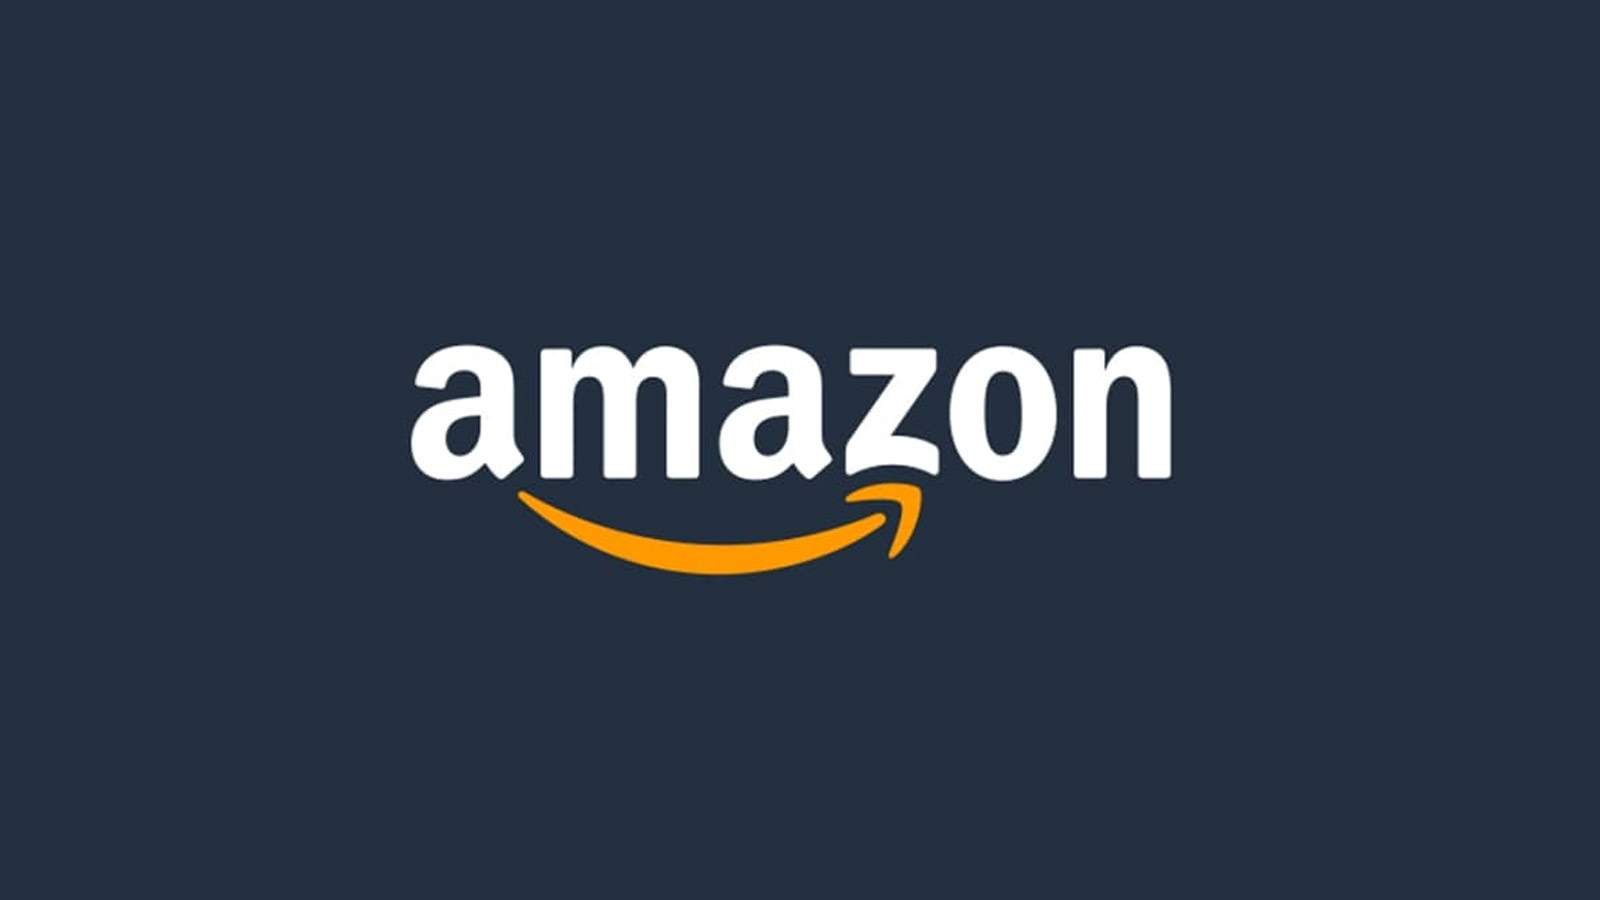 sign-in-to-amazon